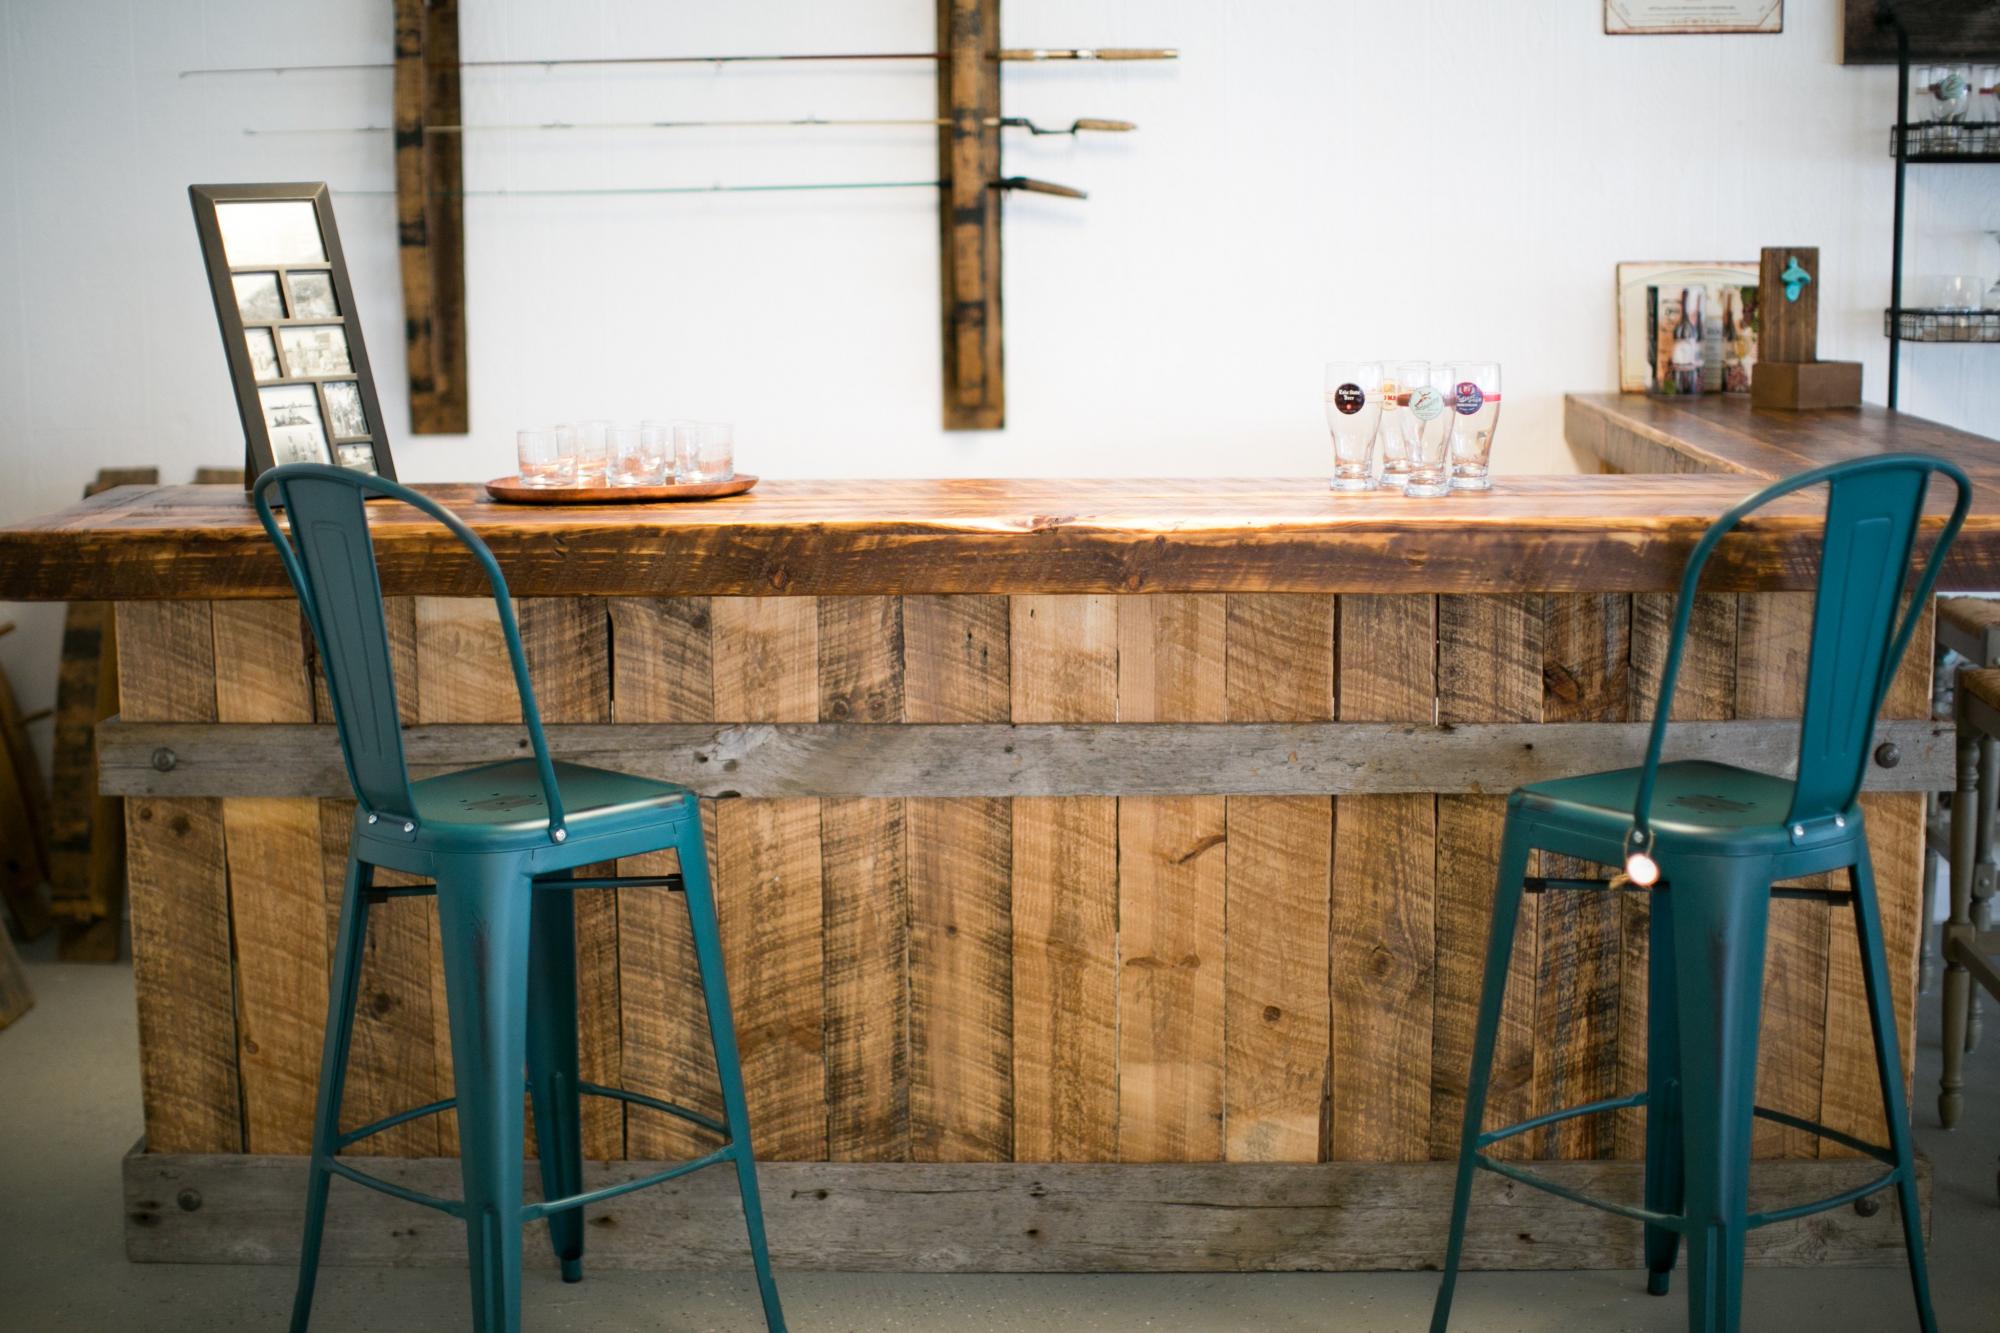 A reclaimed wood bar with two stools in front of it.